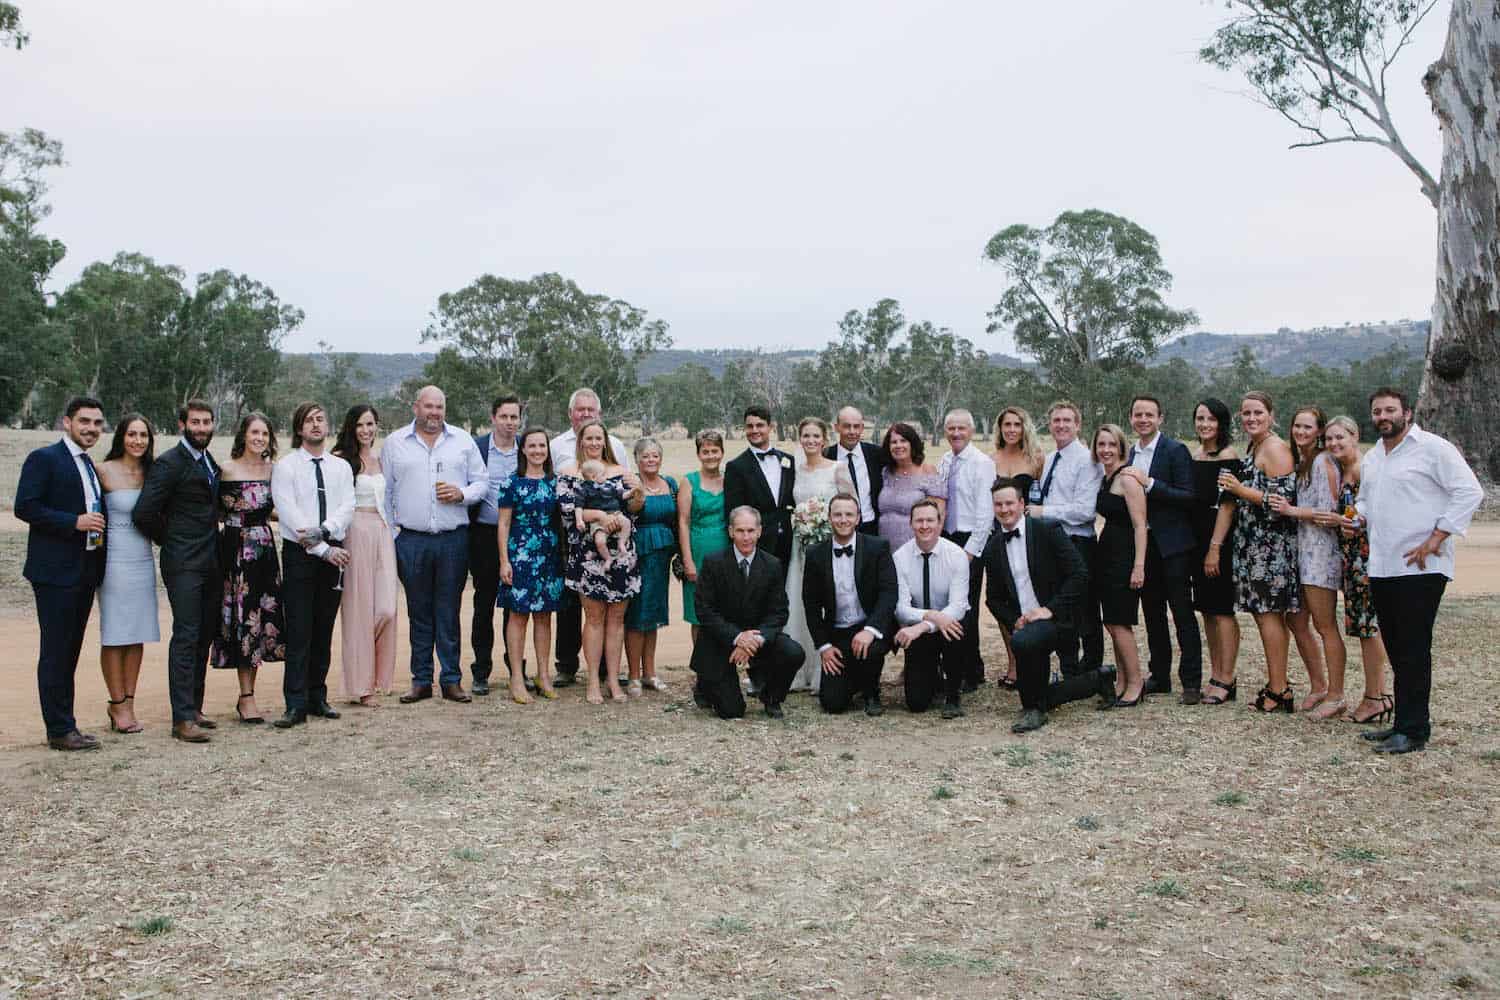 Killeen Station Barn Weddings Melbourne Mia and Brents Wedding Madeleine Chiller Photography 2